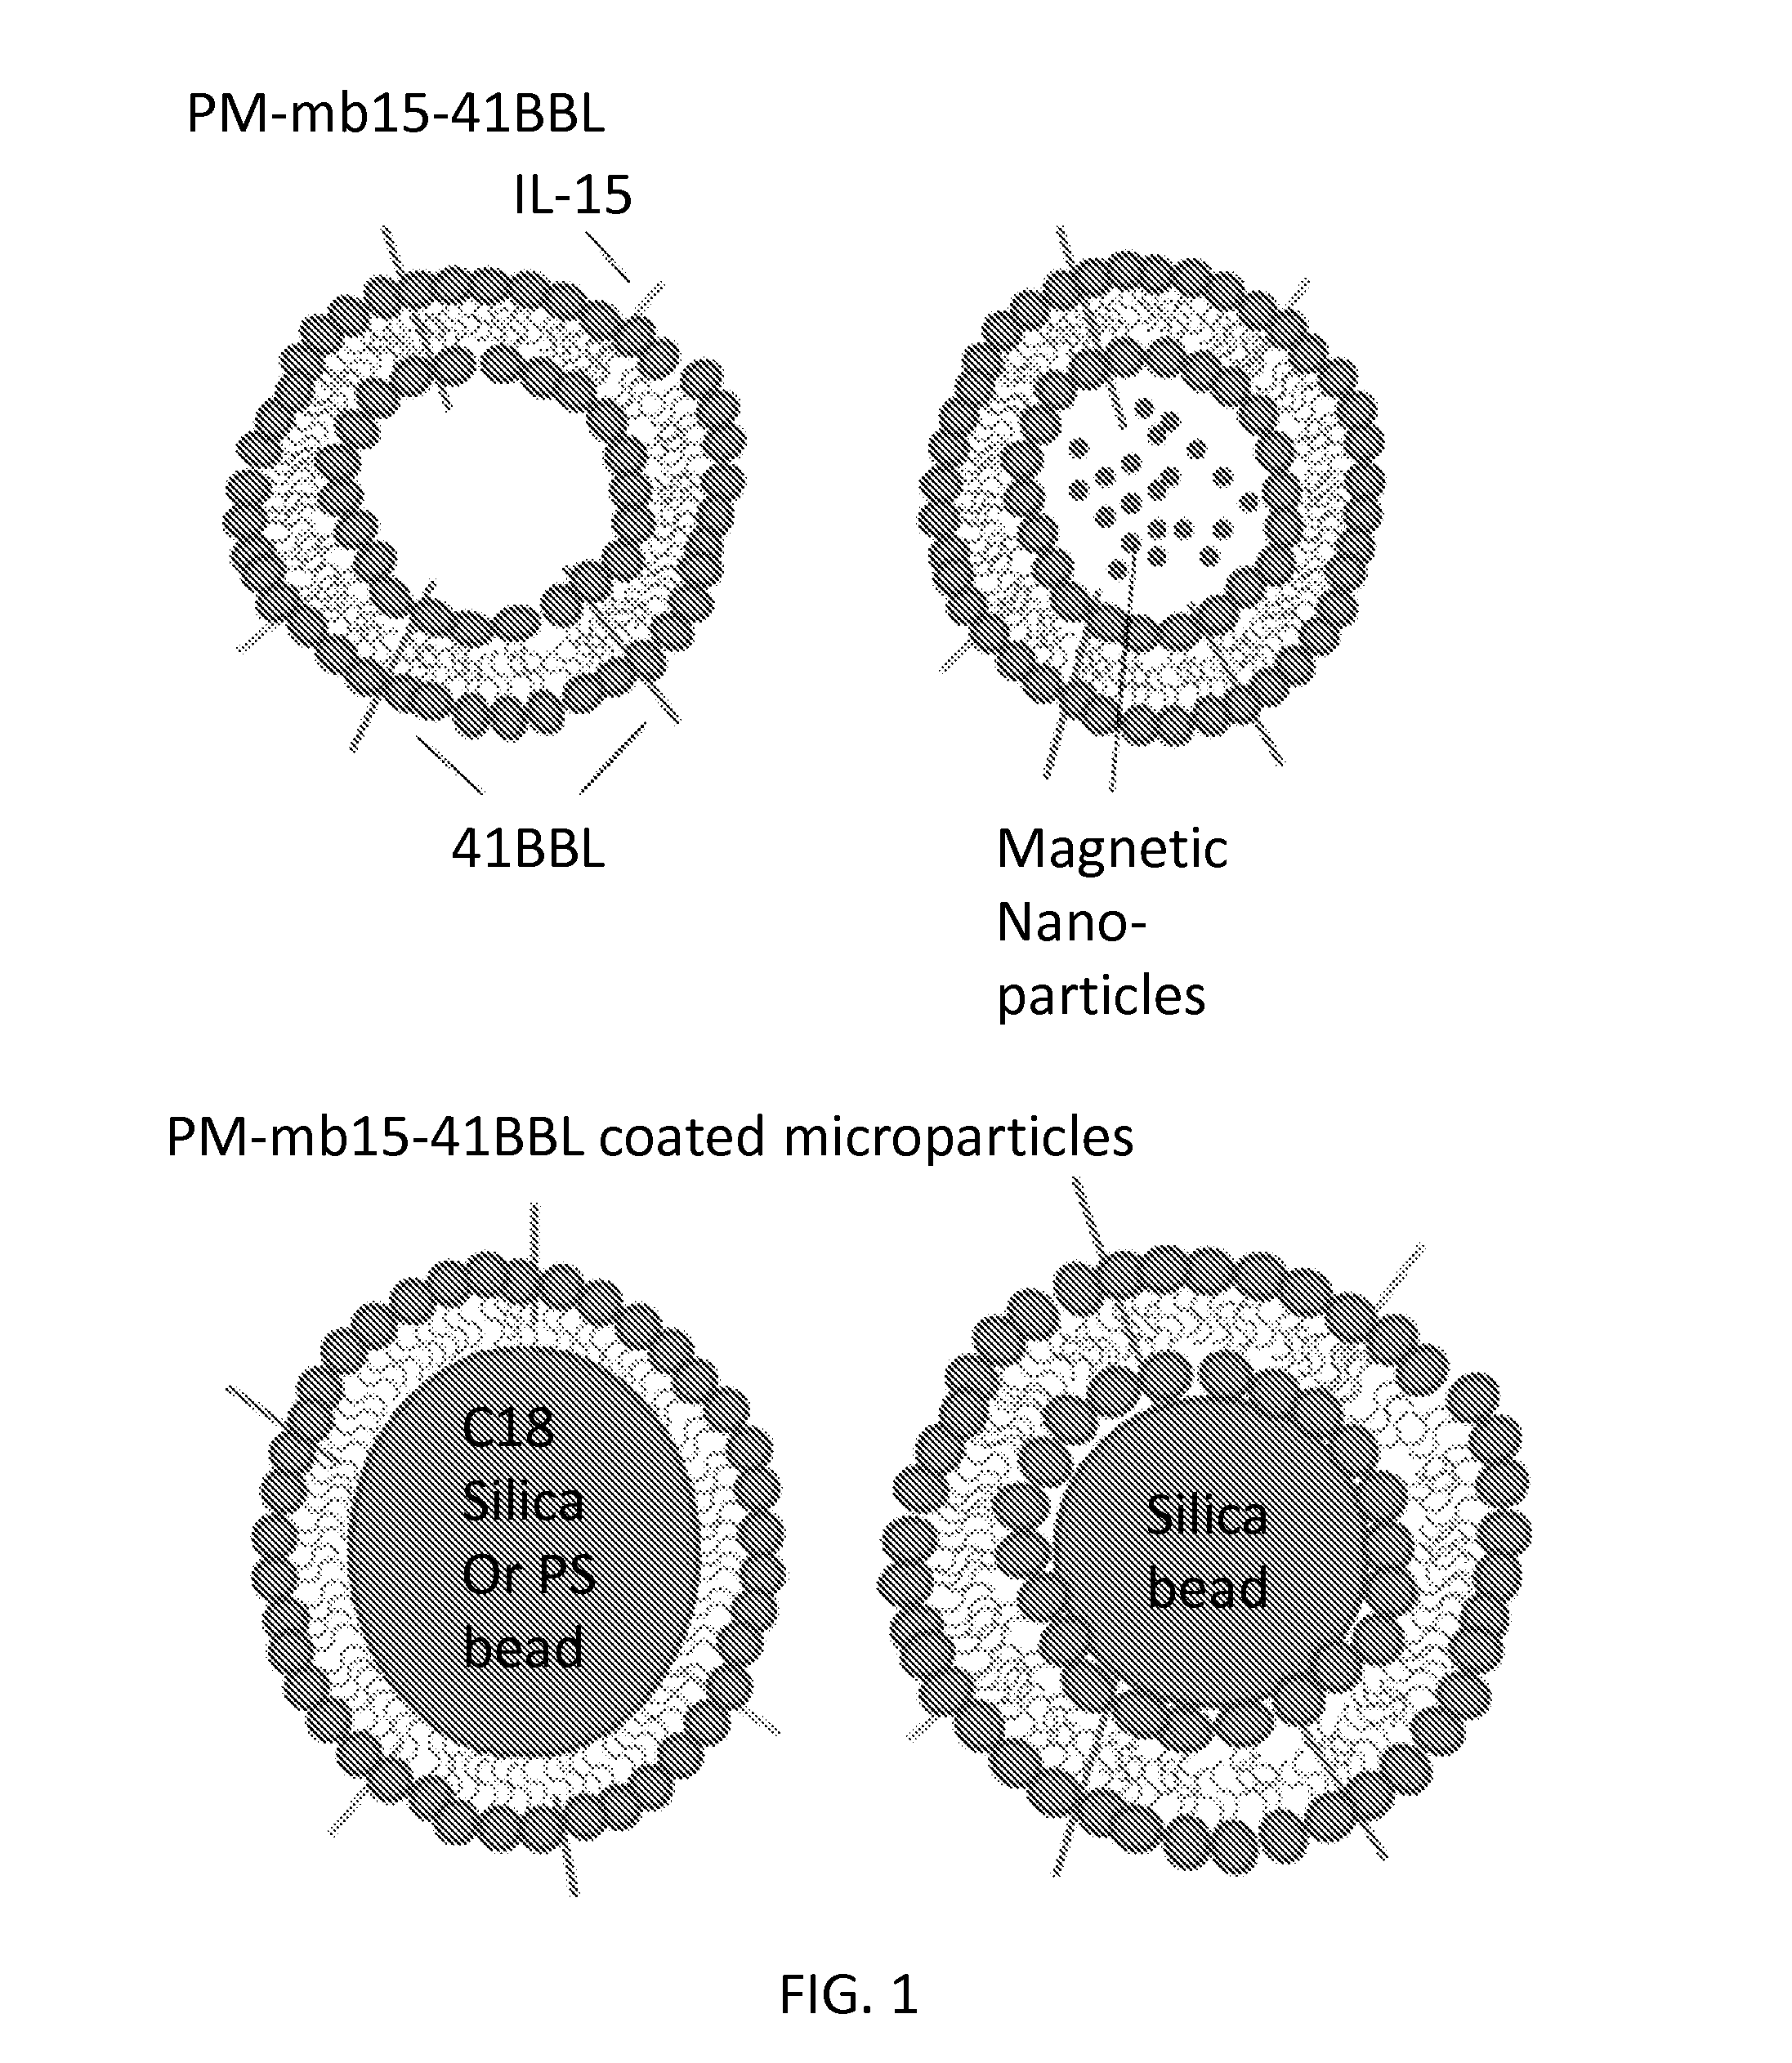 Methods and Compositions for Natural Killer Cells